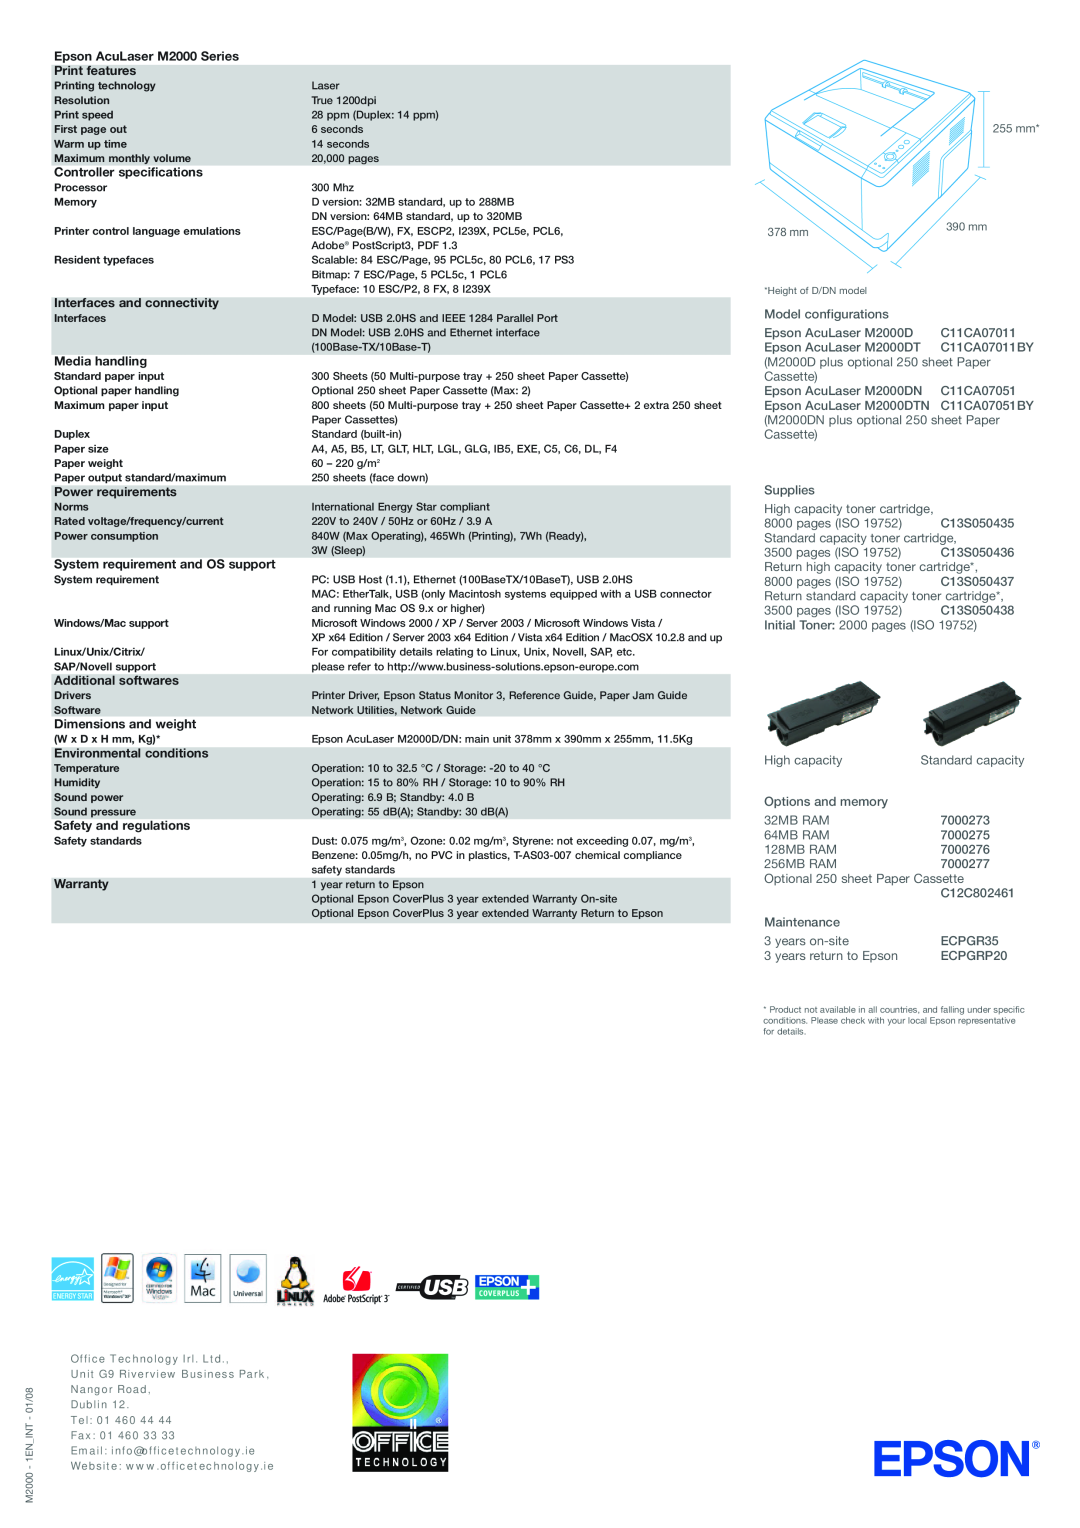 Epson manual Epson AcuLaser M2000 Series Print features 